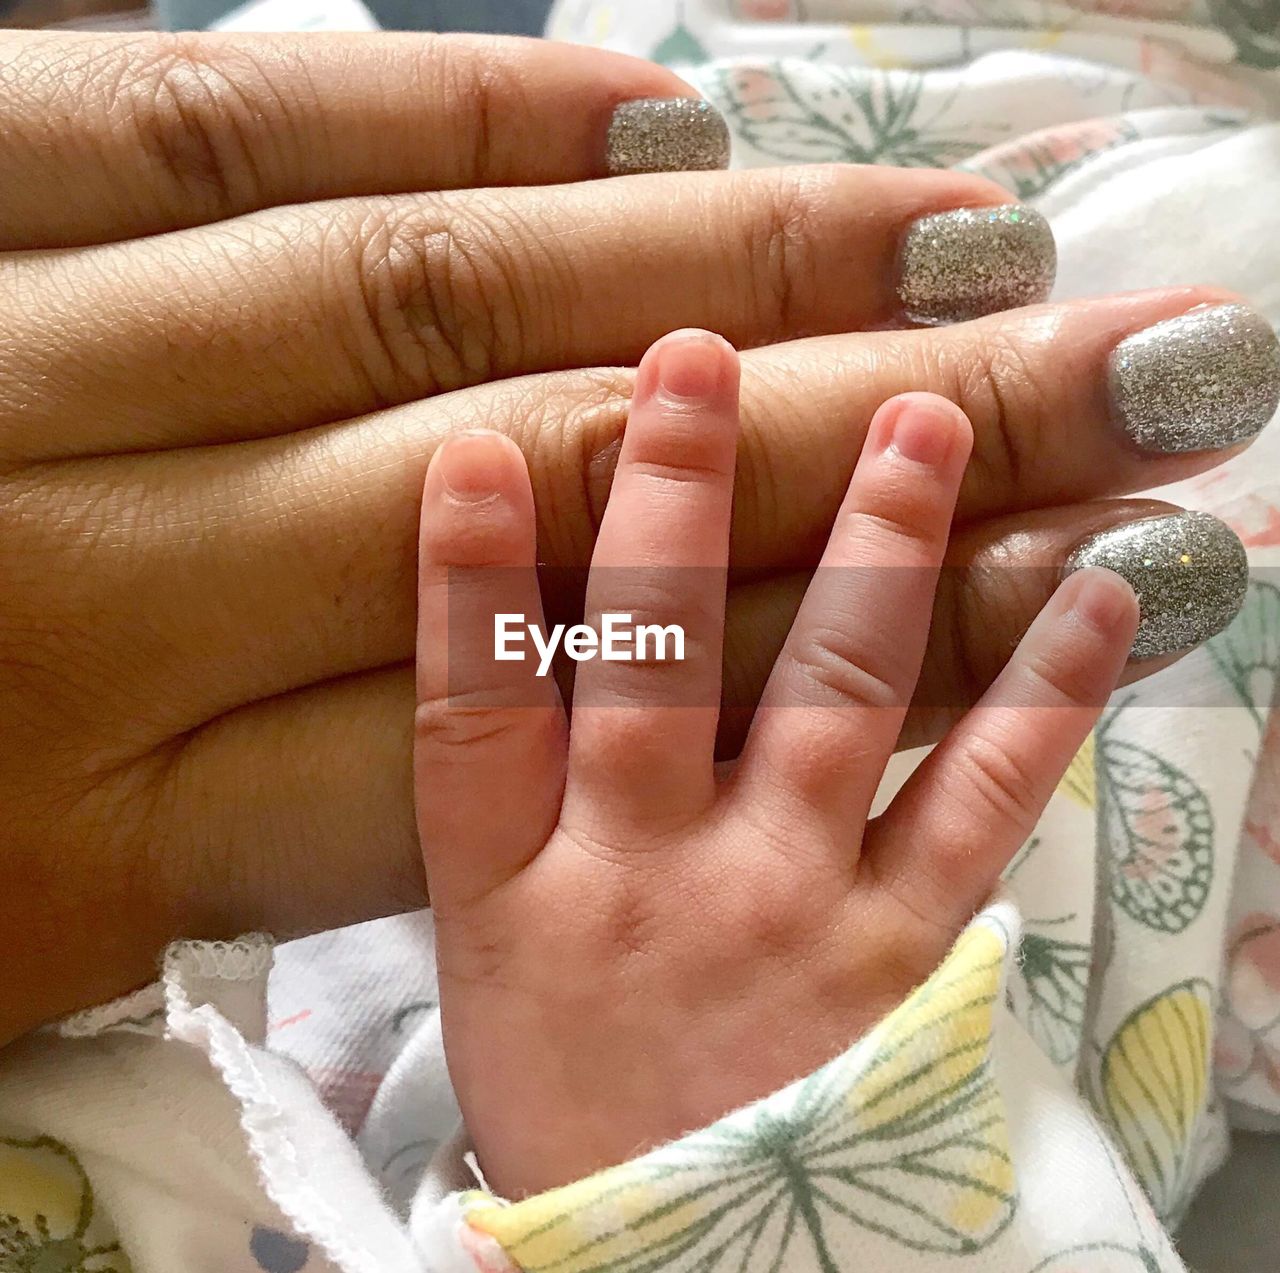 CLOSE-UP OF HANDS HOLDING BABY FEET